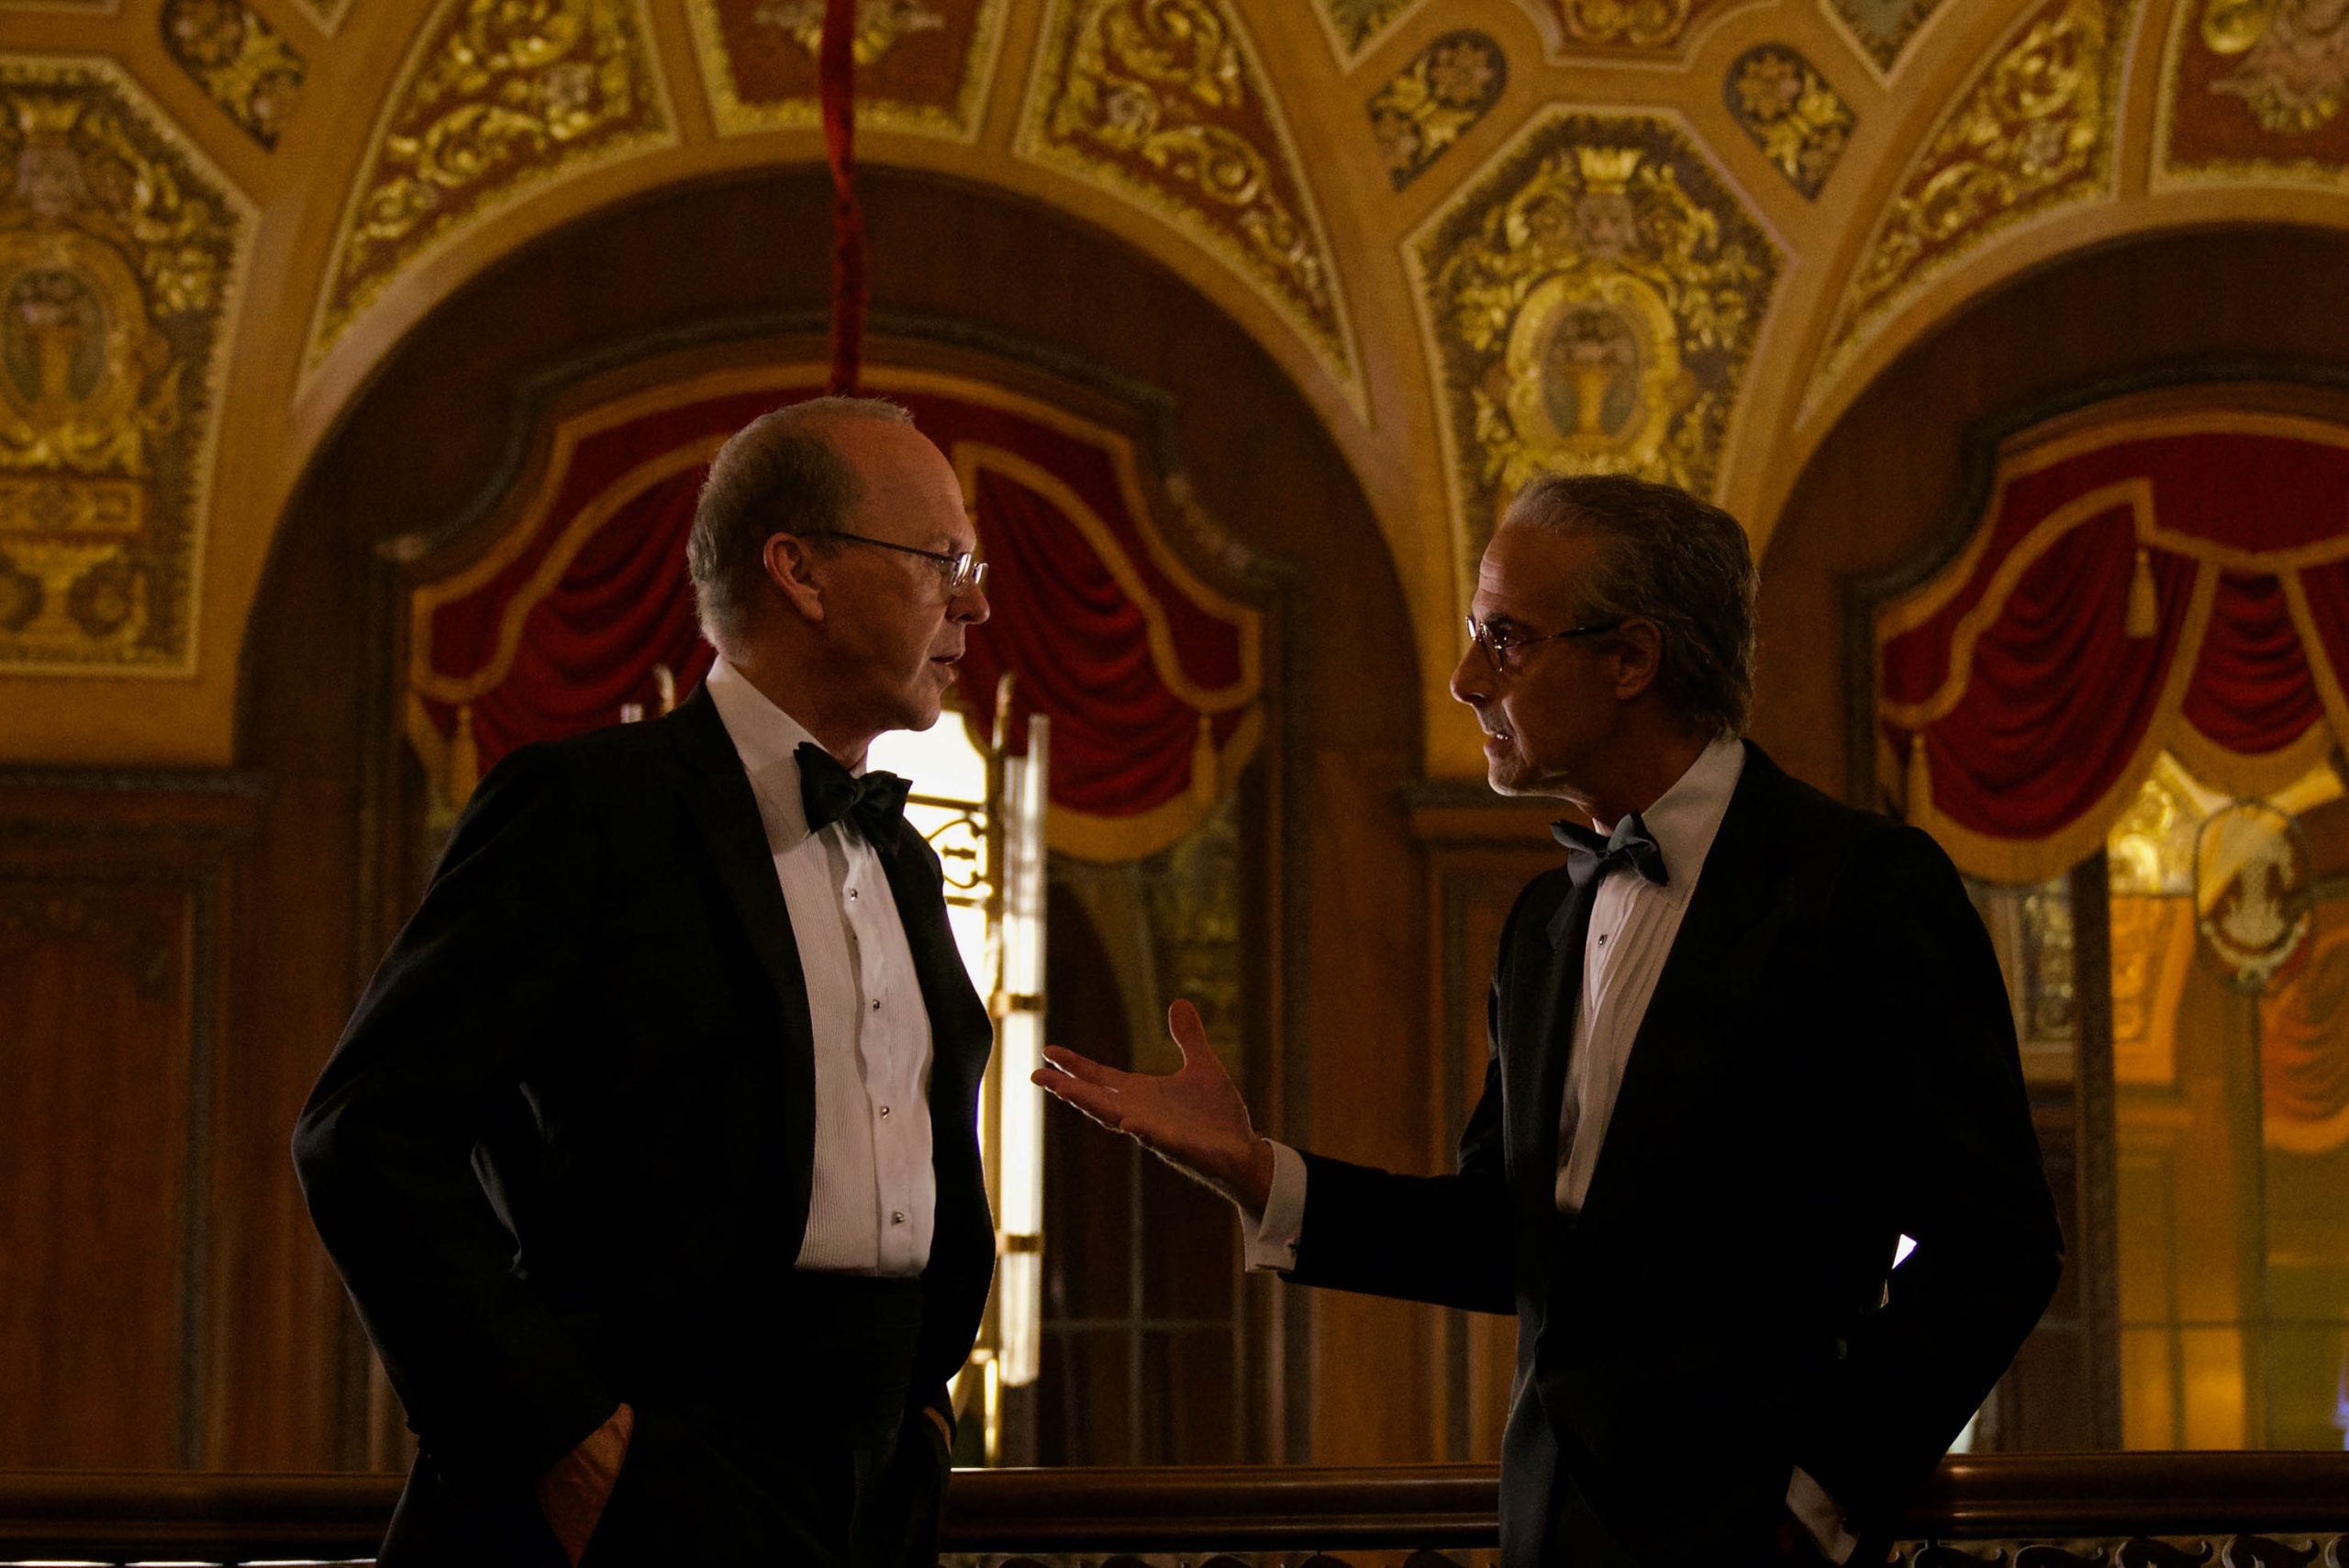 Michael Keaton and Stanley Tucci appear in Worth by Sara Colangelo.